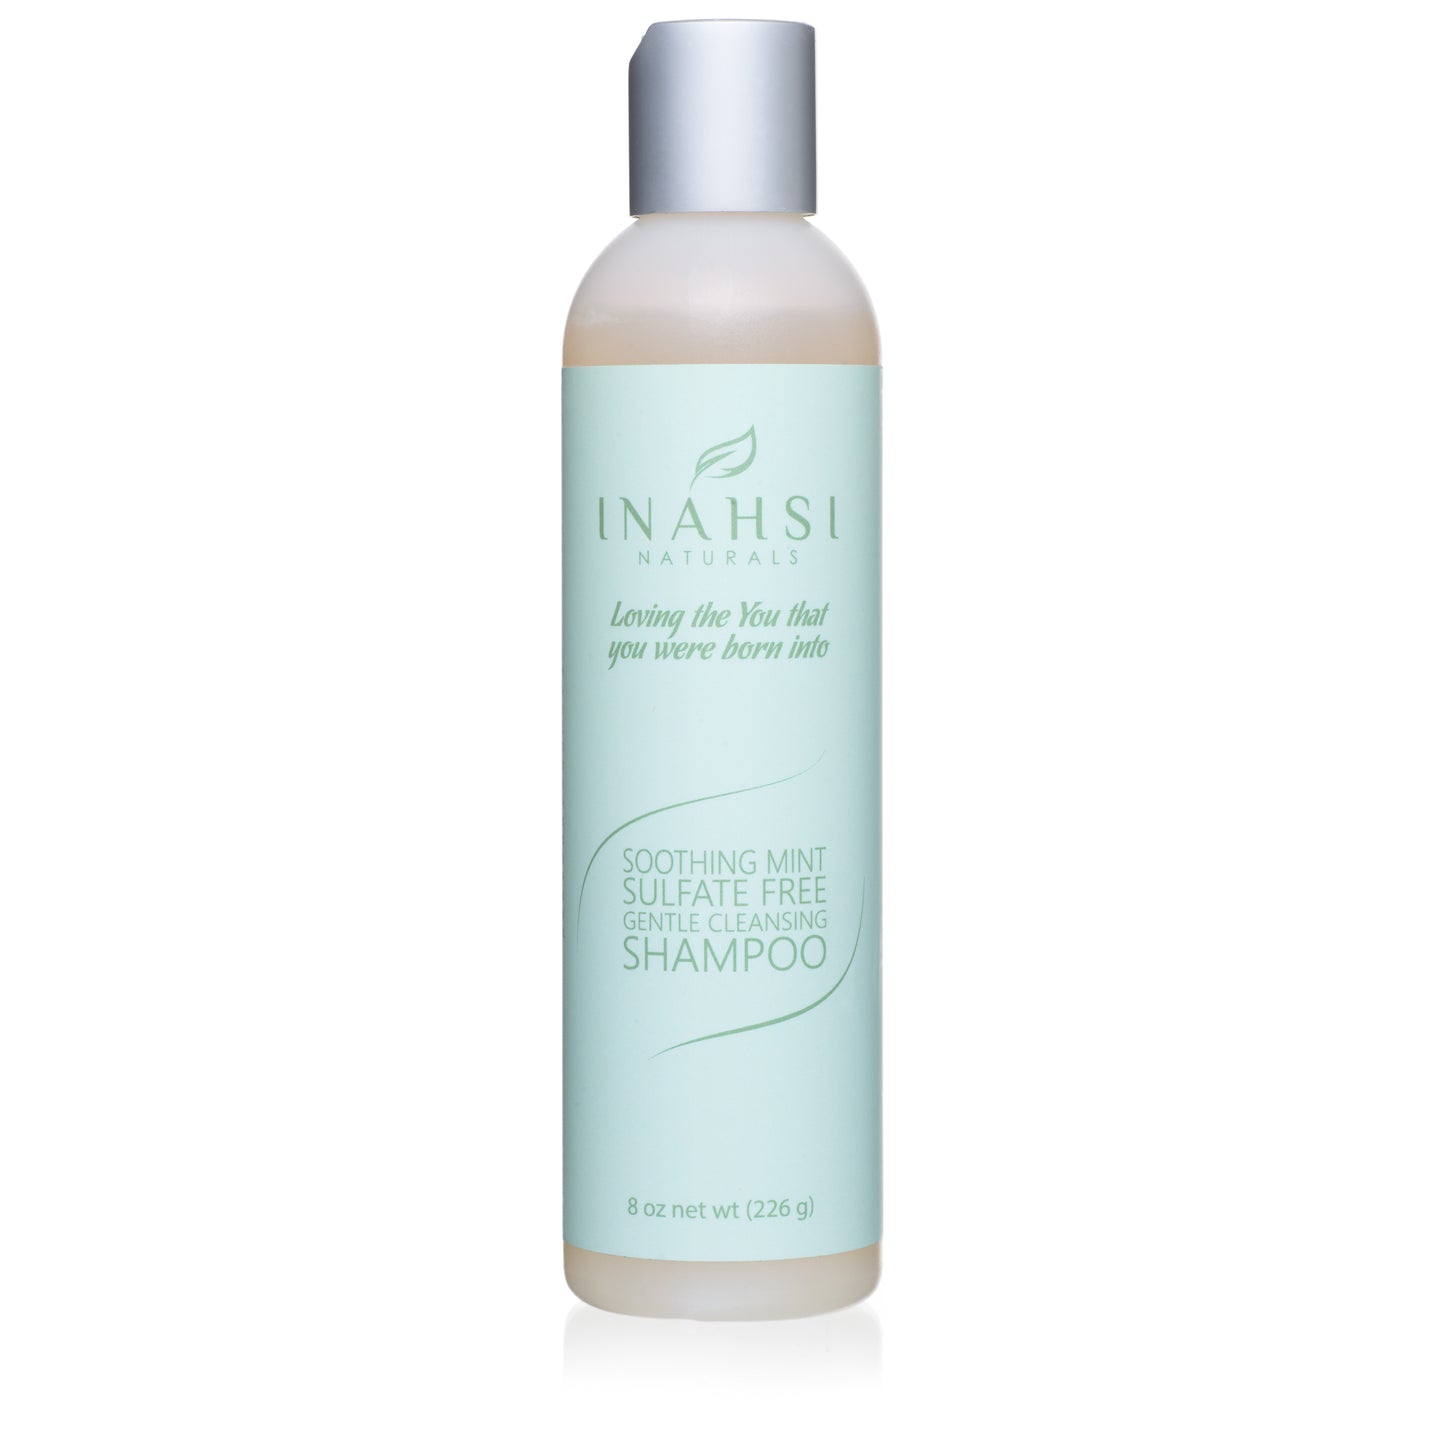 Inahsi Naturals - Soothing Mint Gentle Cleansing Shampoo